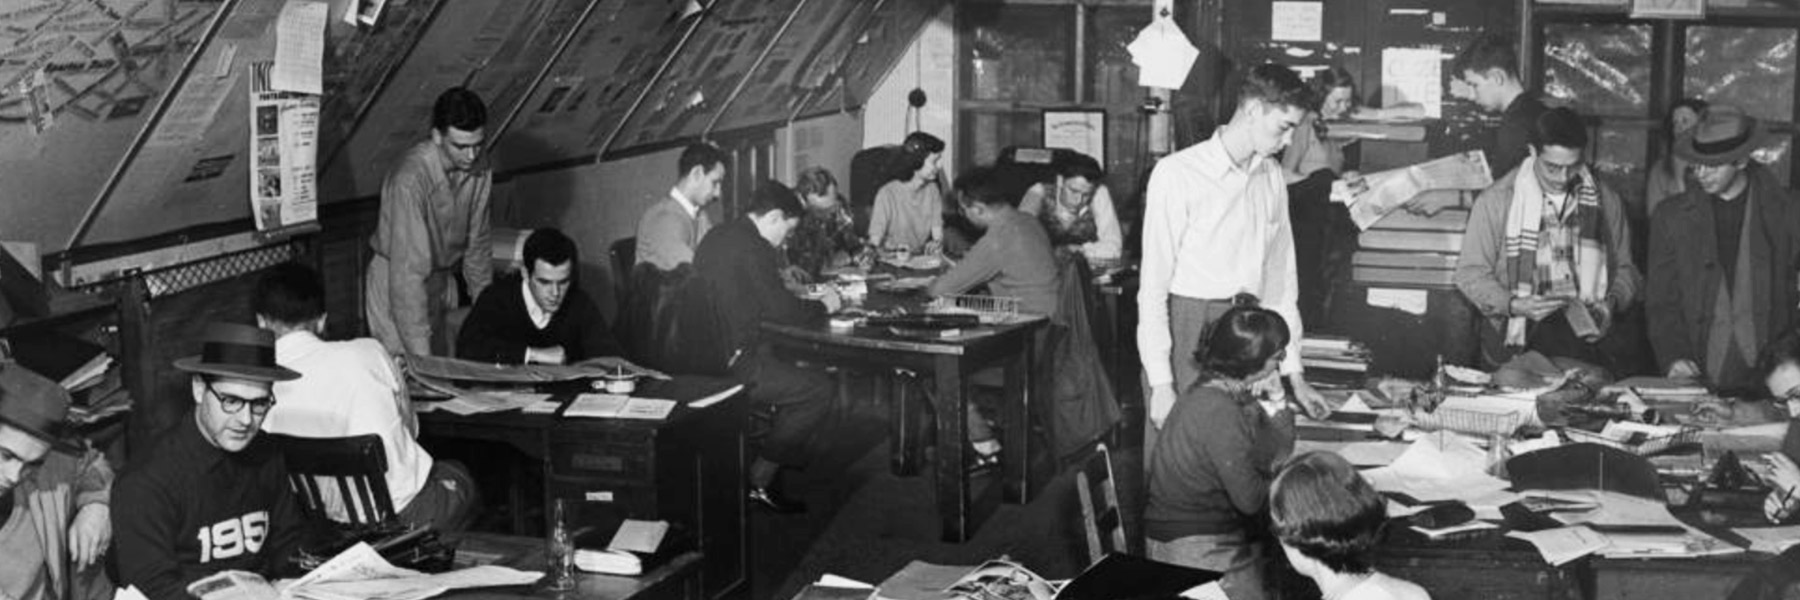 Students work at their desks at the Indiana Daily Student in 1950.